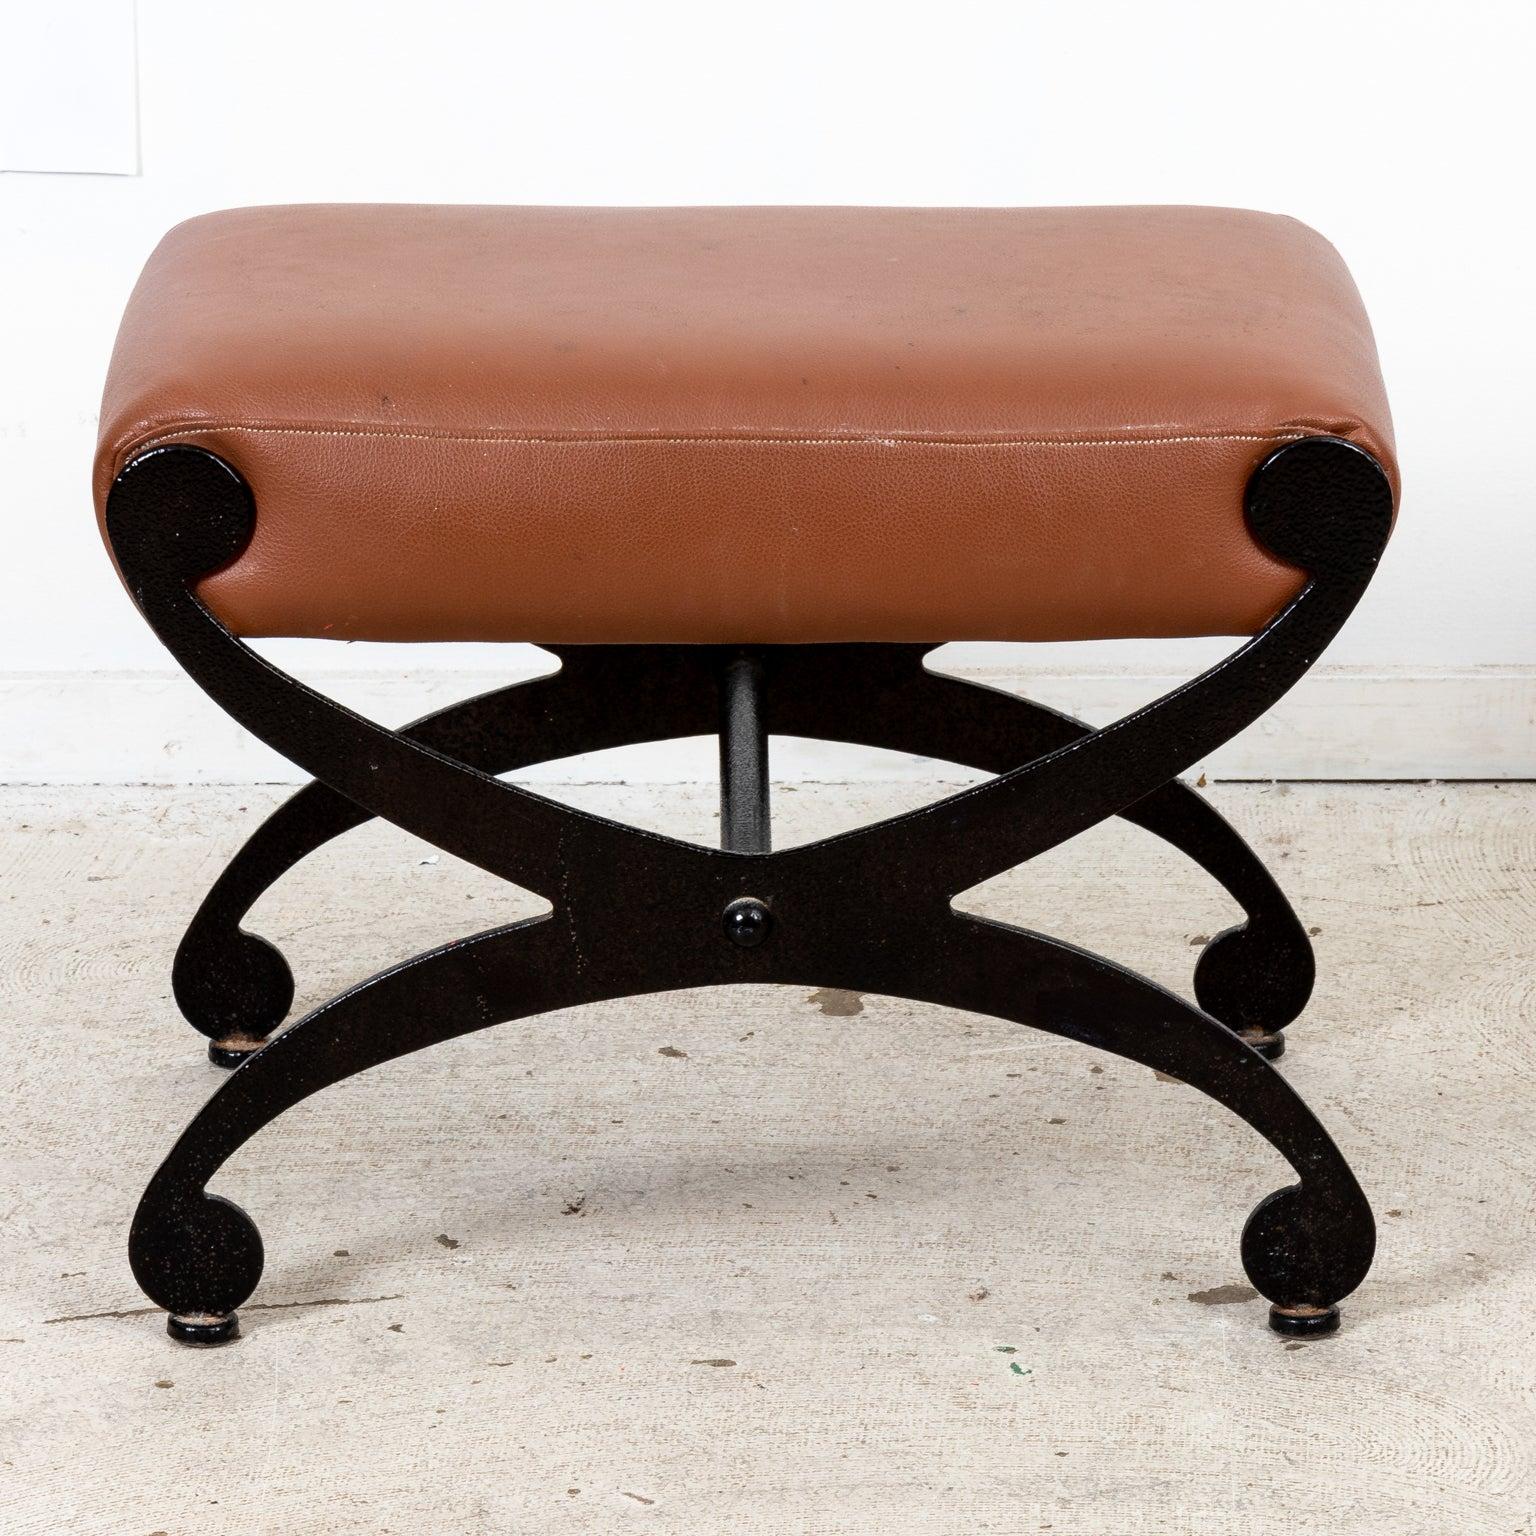 Pair of Iron x-base curule shaped stools with leather upholstered seats. Please note of wear consistent with age including finish loss, patina, and minor oxidation to the metal. The leather also shows staining and dark spots due to daily use.
   